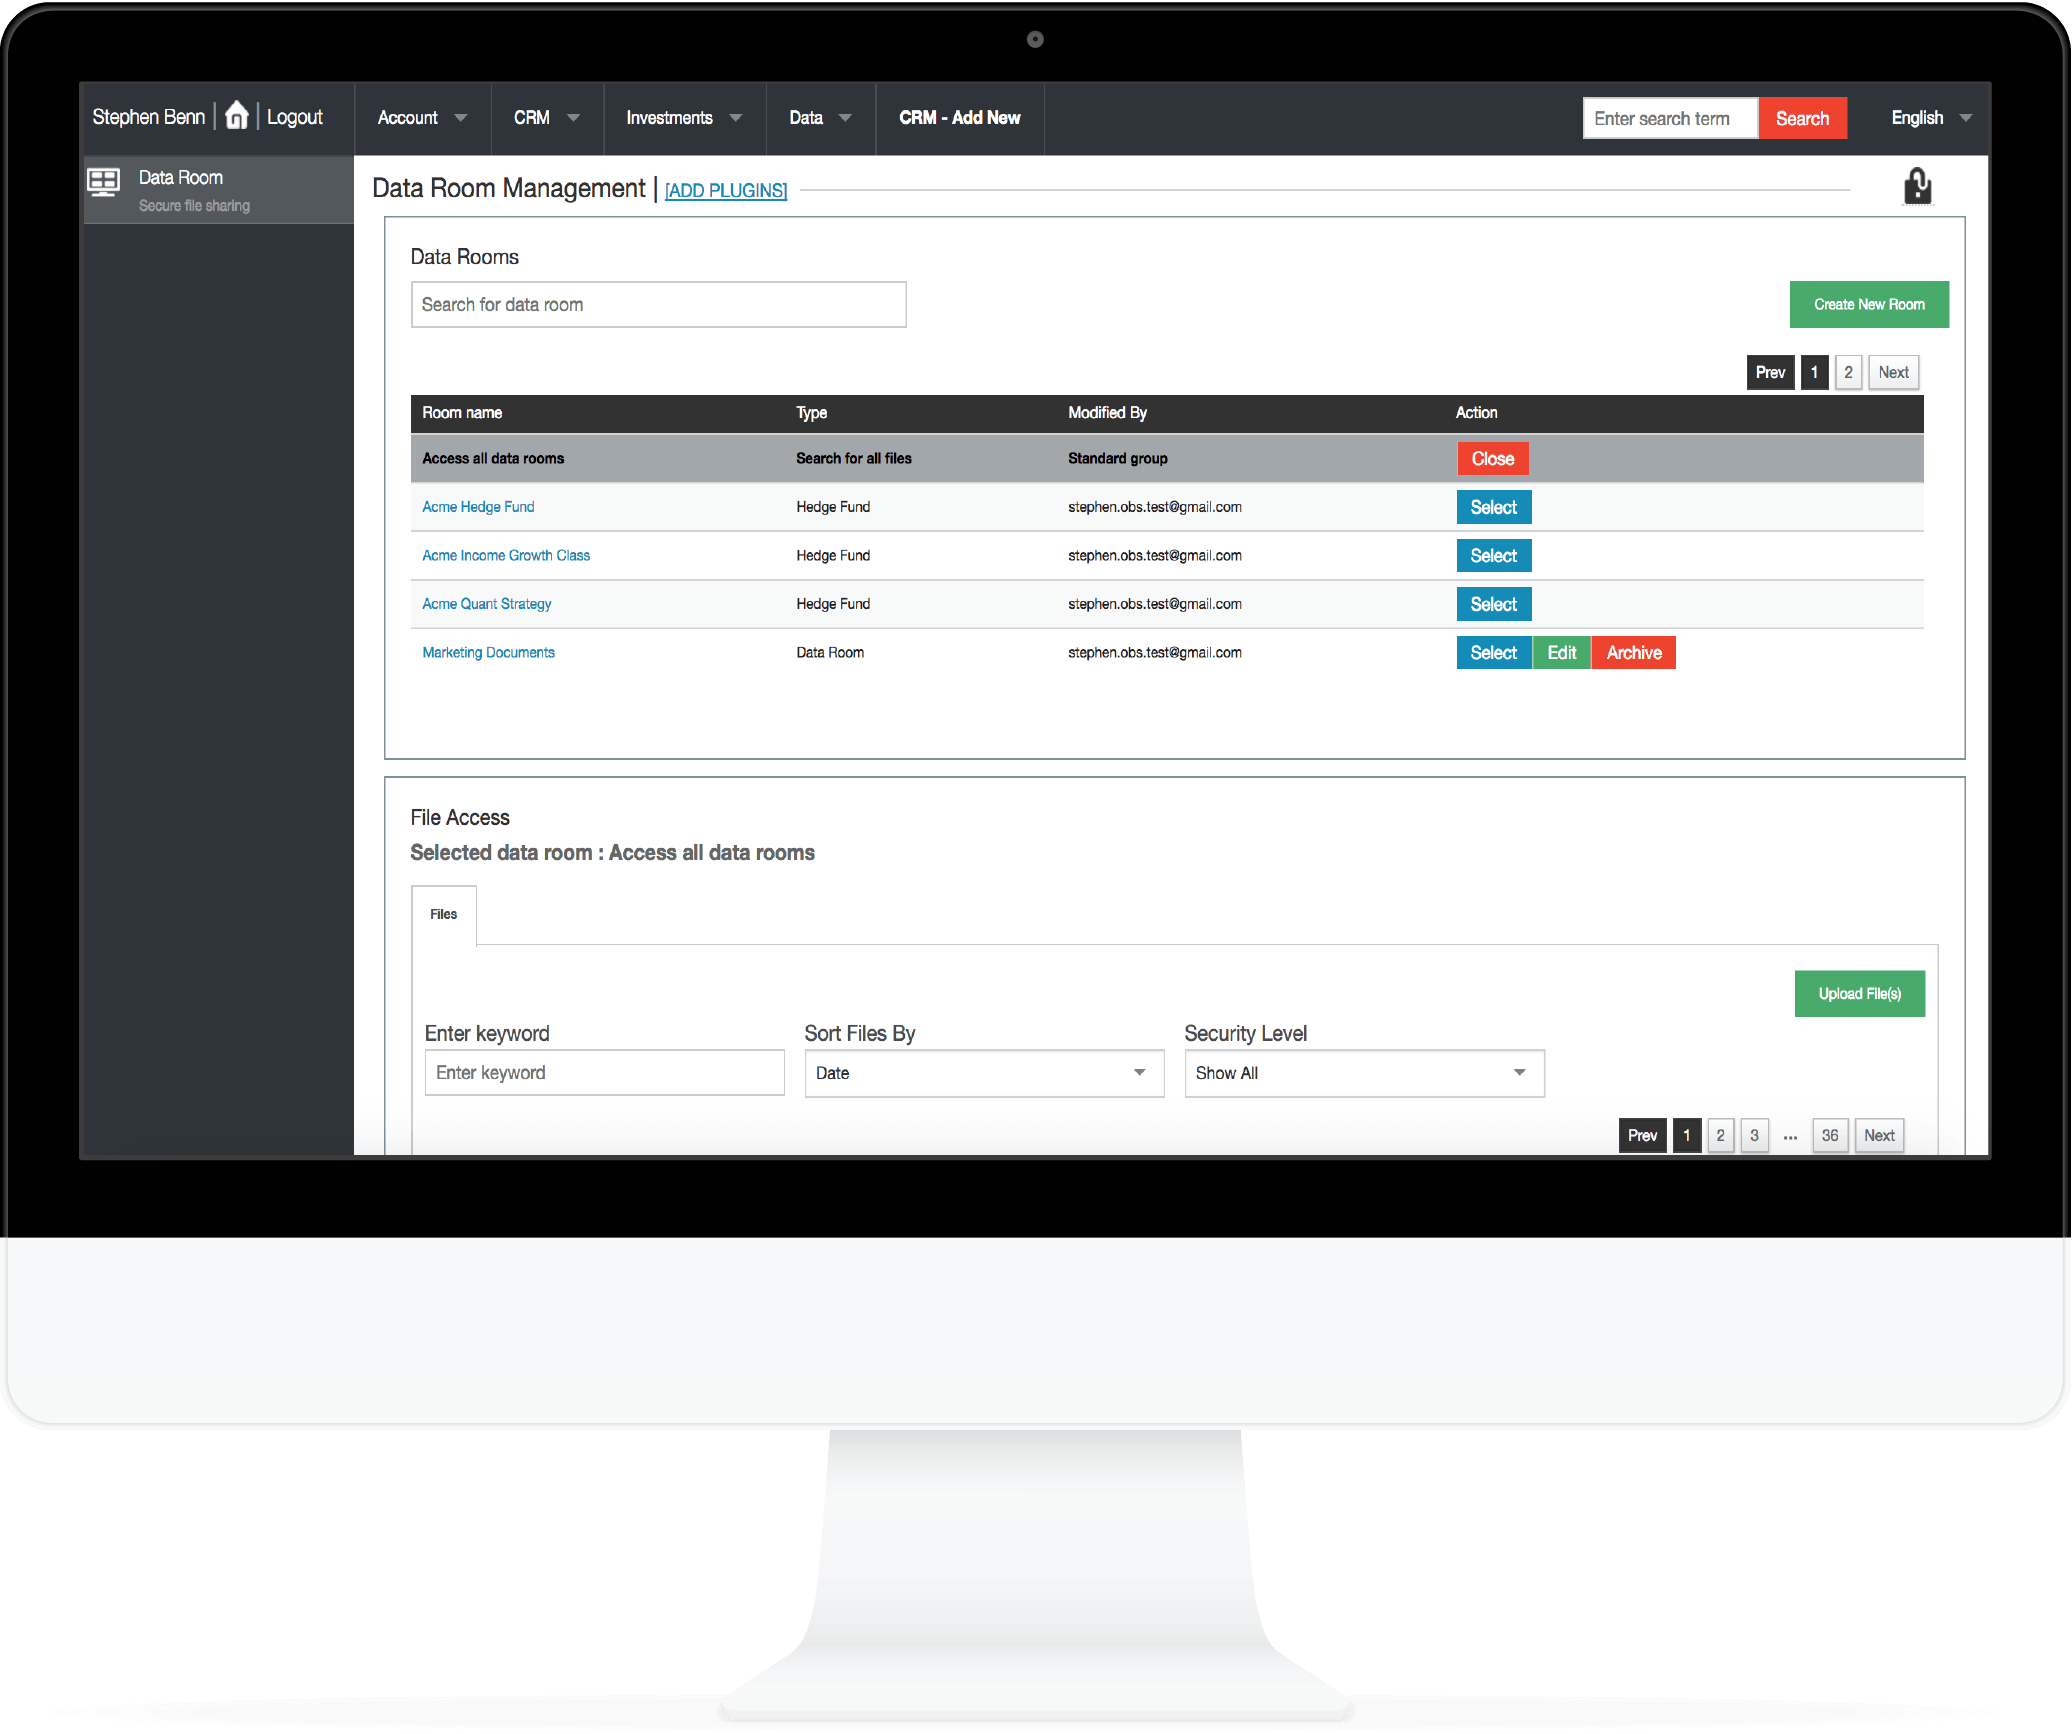 Obsidian Suite Software - Data rooms can be created to share and track files securely